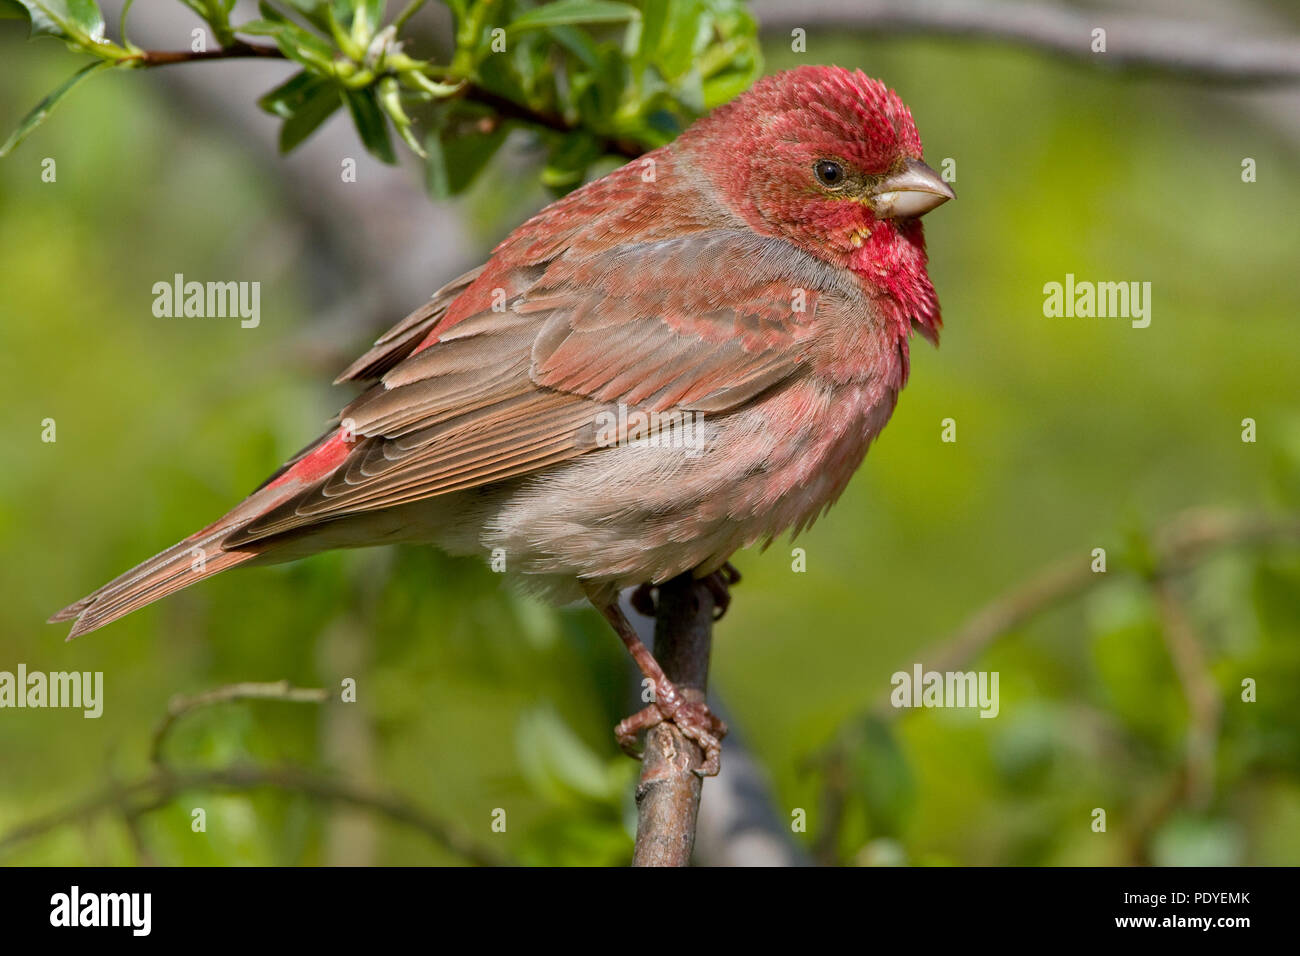 A Scarlet Rosefinch on a twig Stock Photo